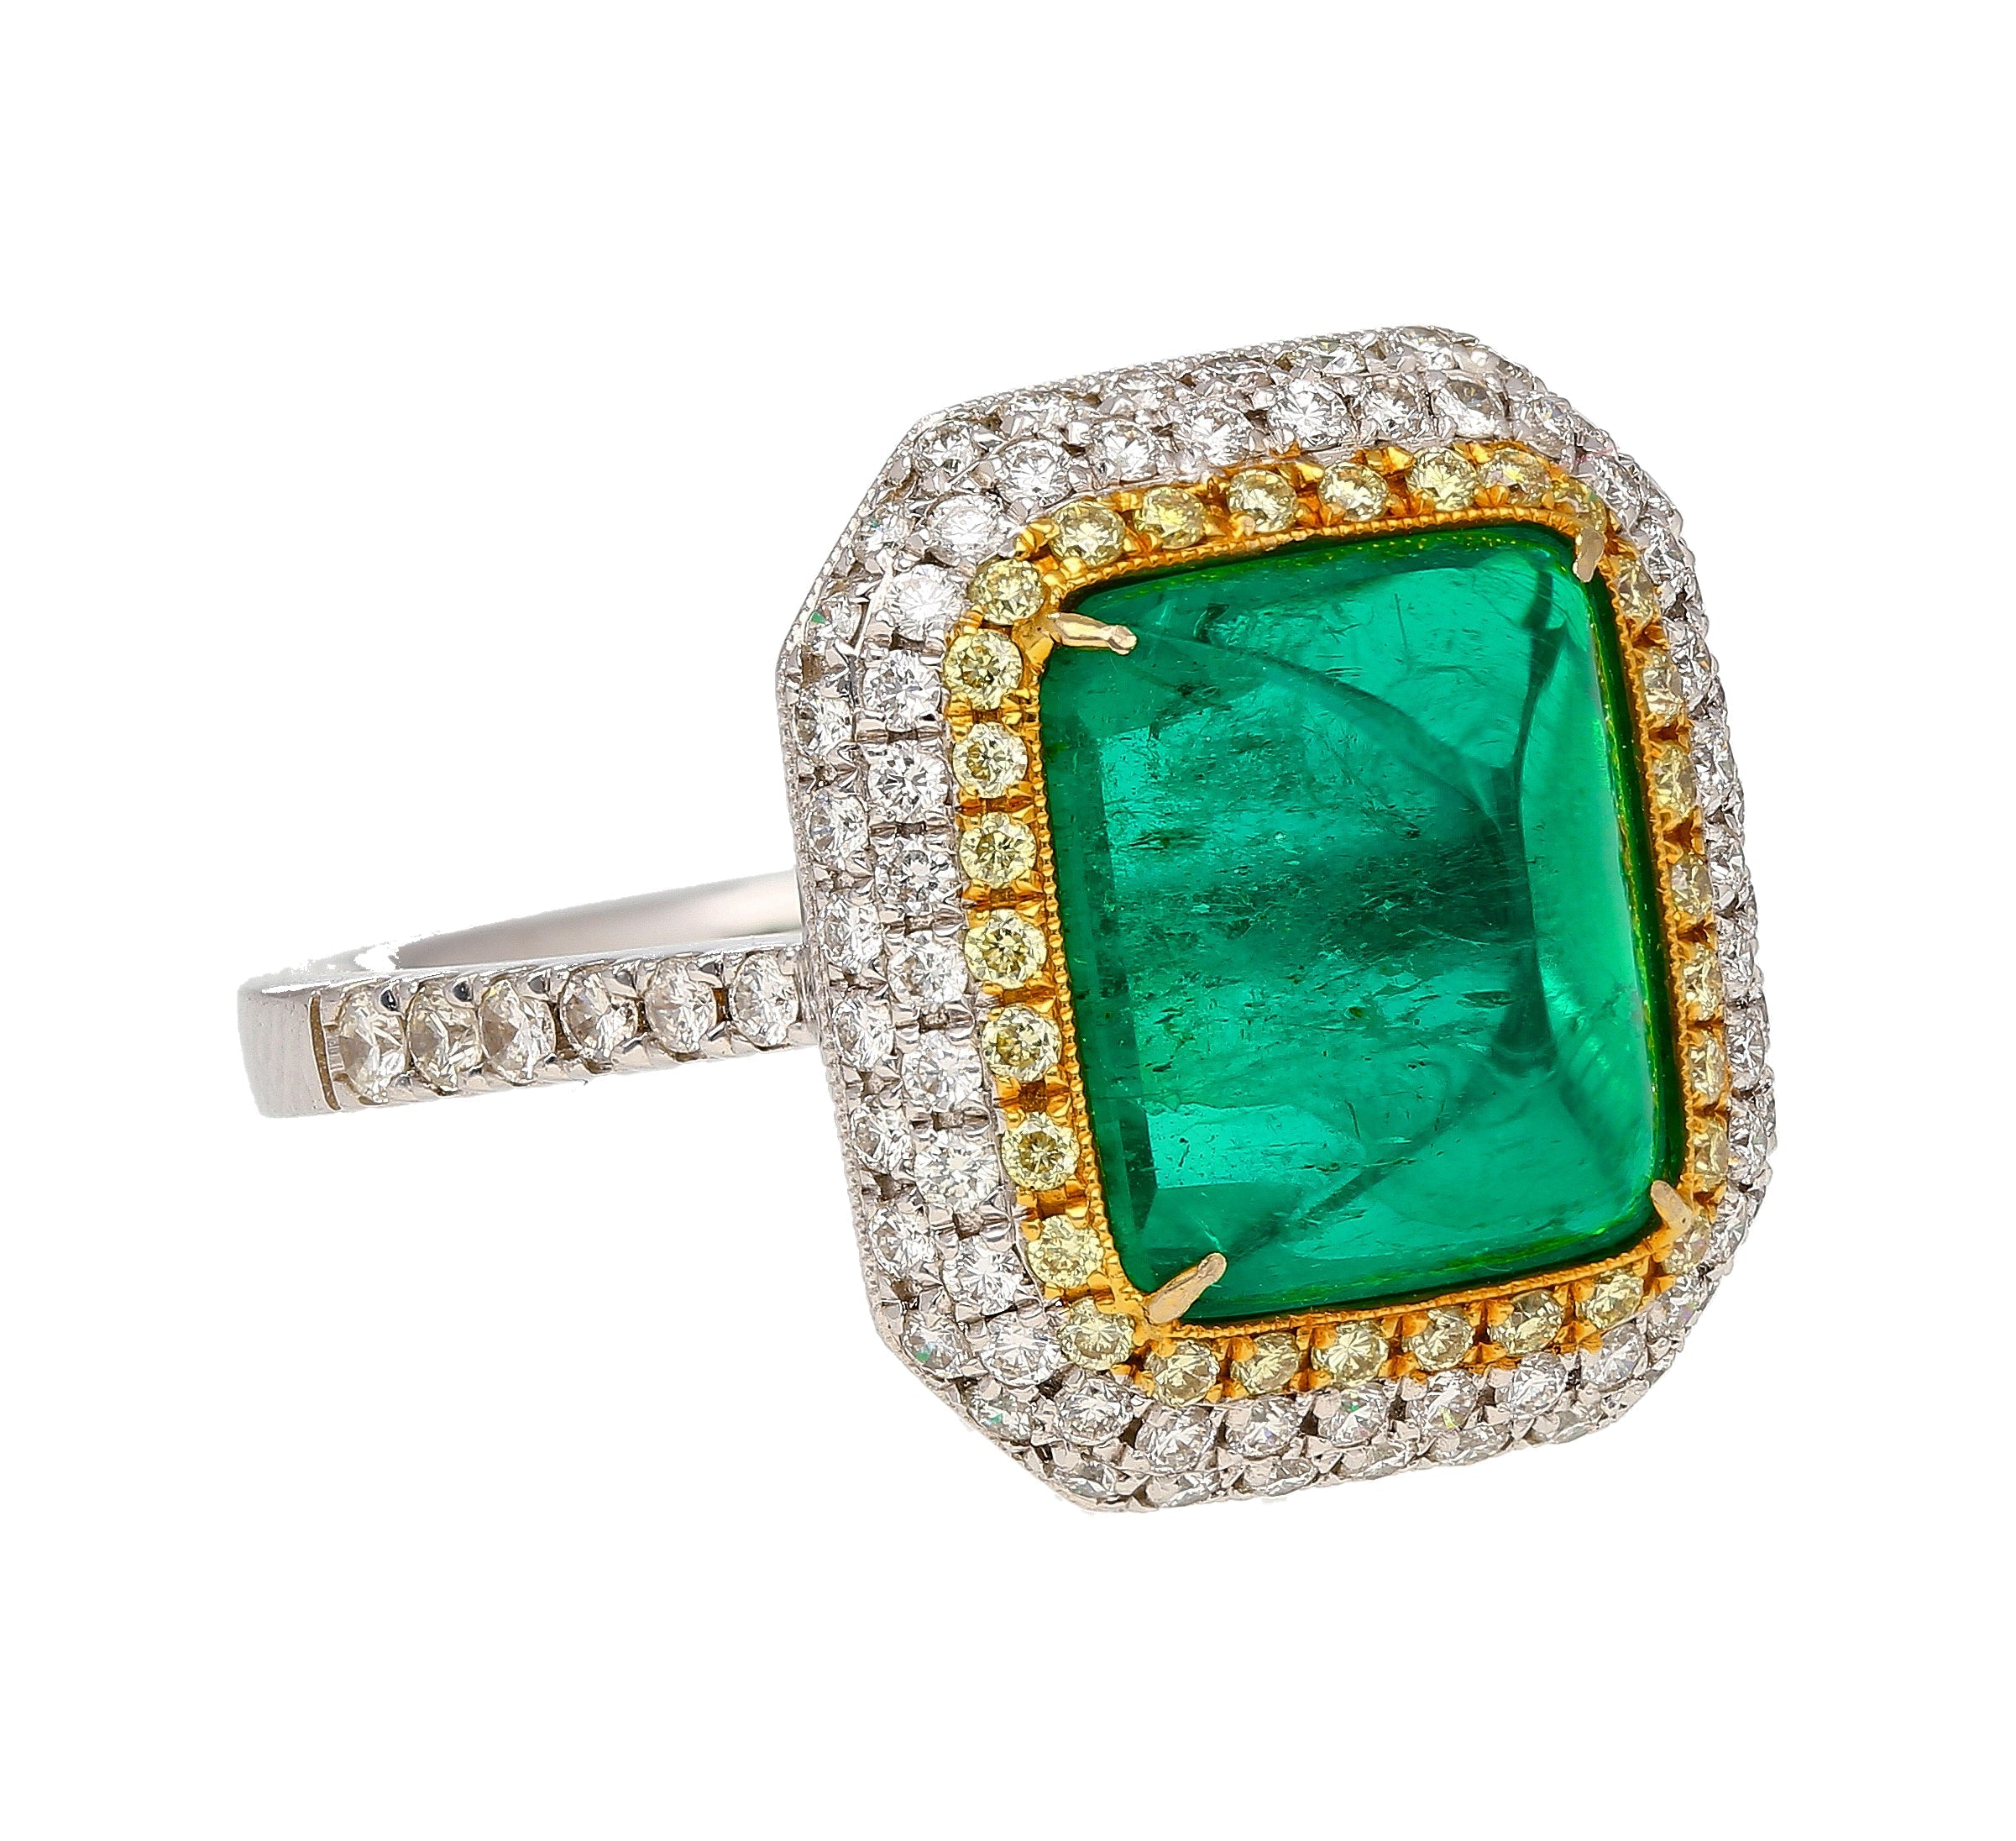 4_49-Carat-Sugarloaf-Cabochon-Cut-Colombian-Emerald-and-Diamond-Halo-Ring-in-18k-White-Gold-Rings-2.jpg